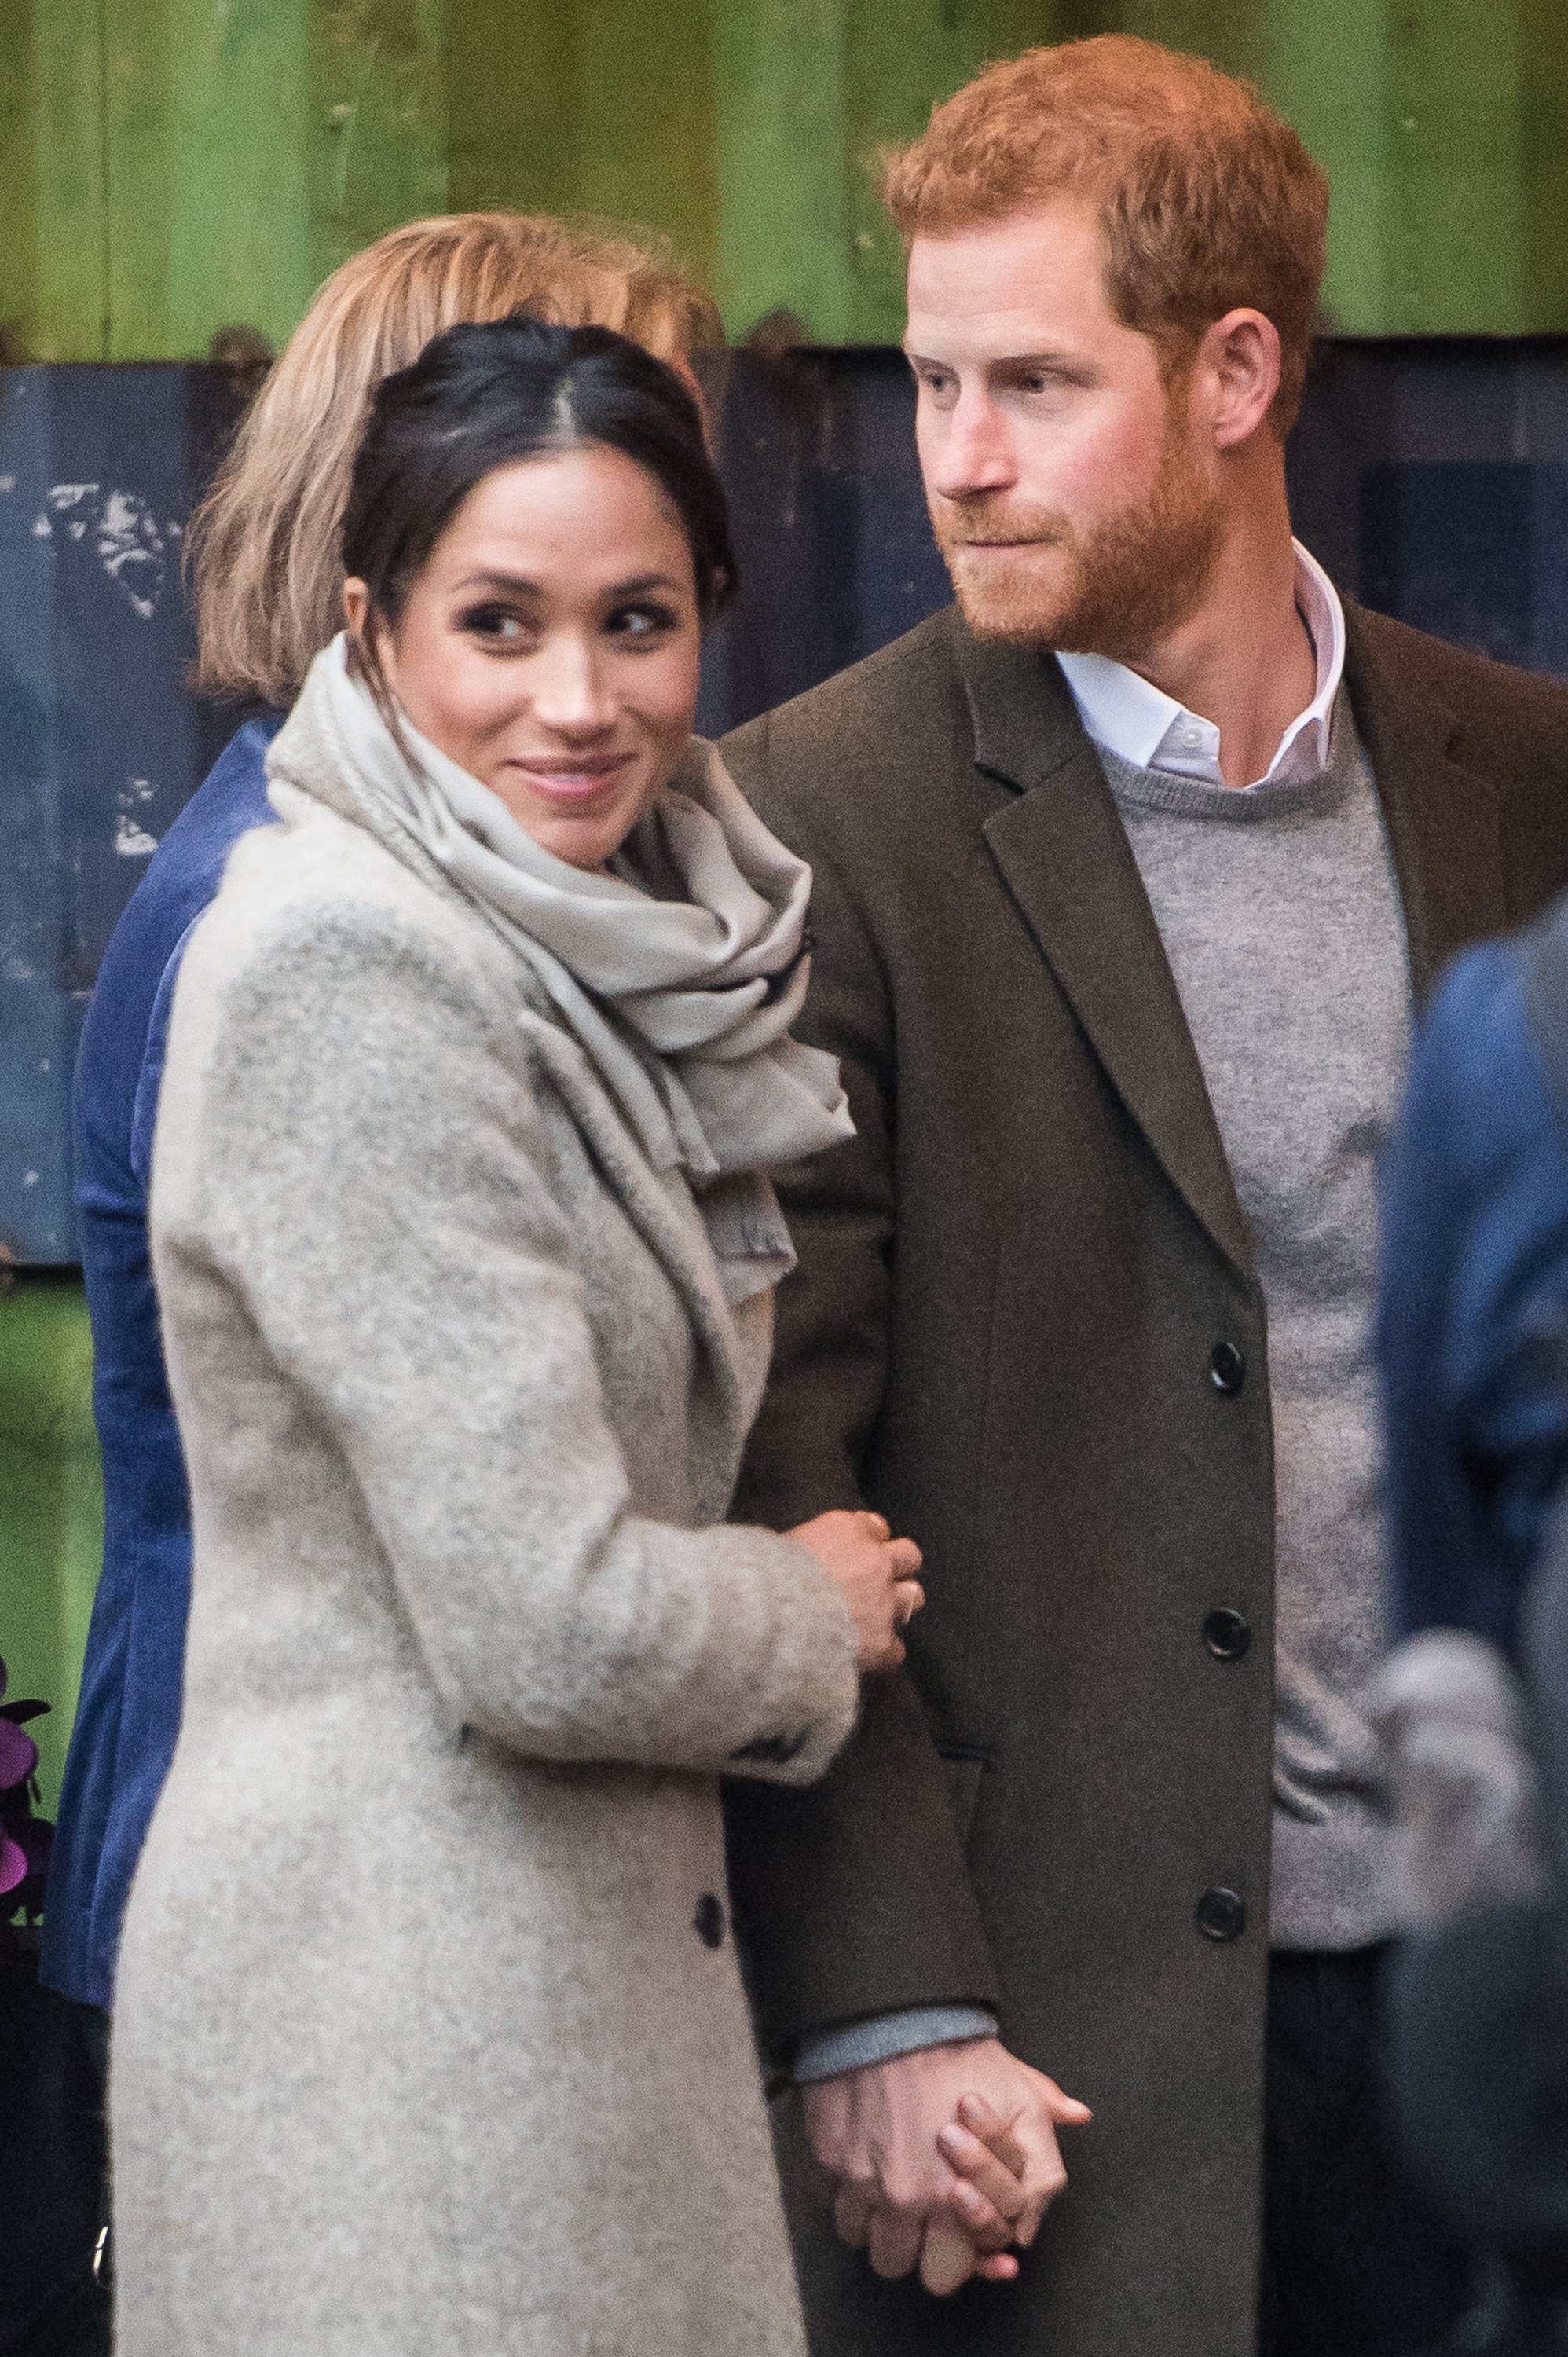 Prince Harry and Meghan Markle visit Reprezent 107.3FM on January 9, 2018 in London, England. | Source: Getty Images